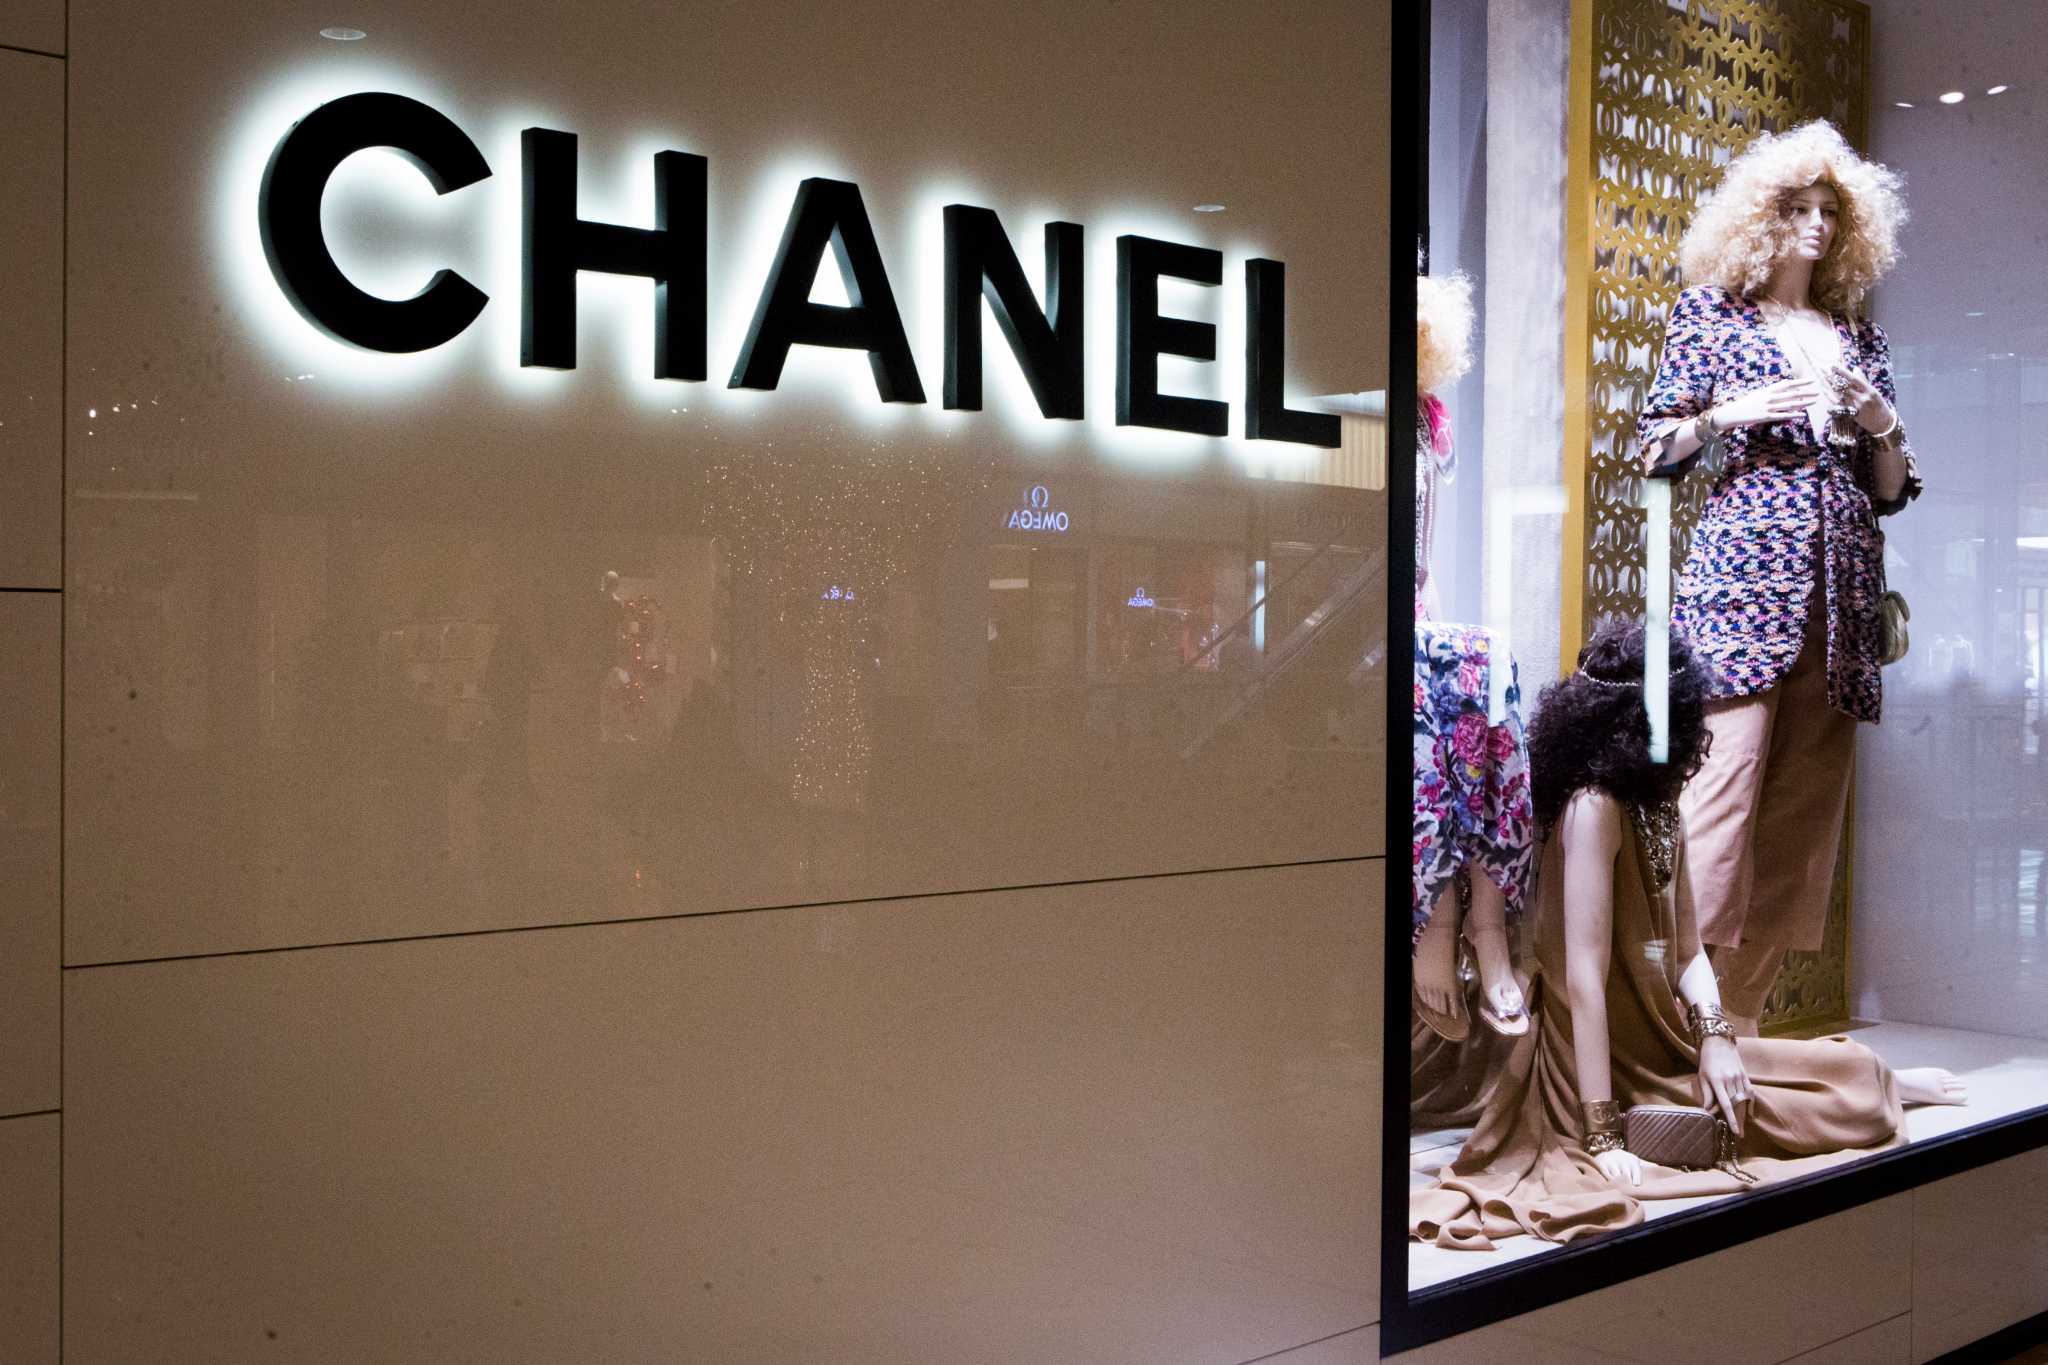 chanel is finally opened in valley fair, san jose! #designershoes #lux